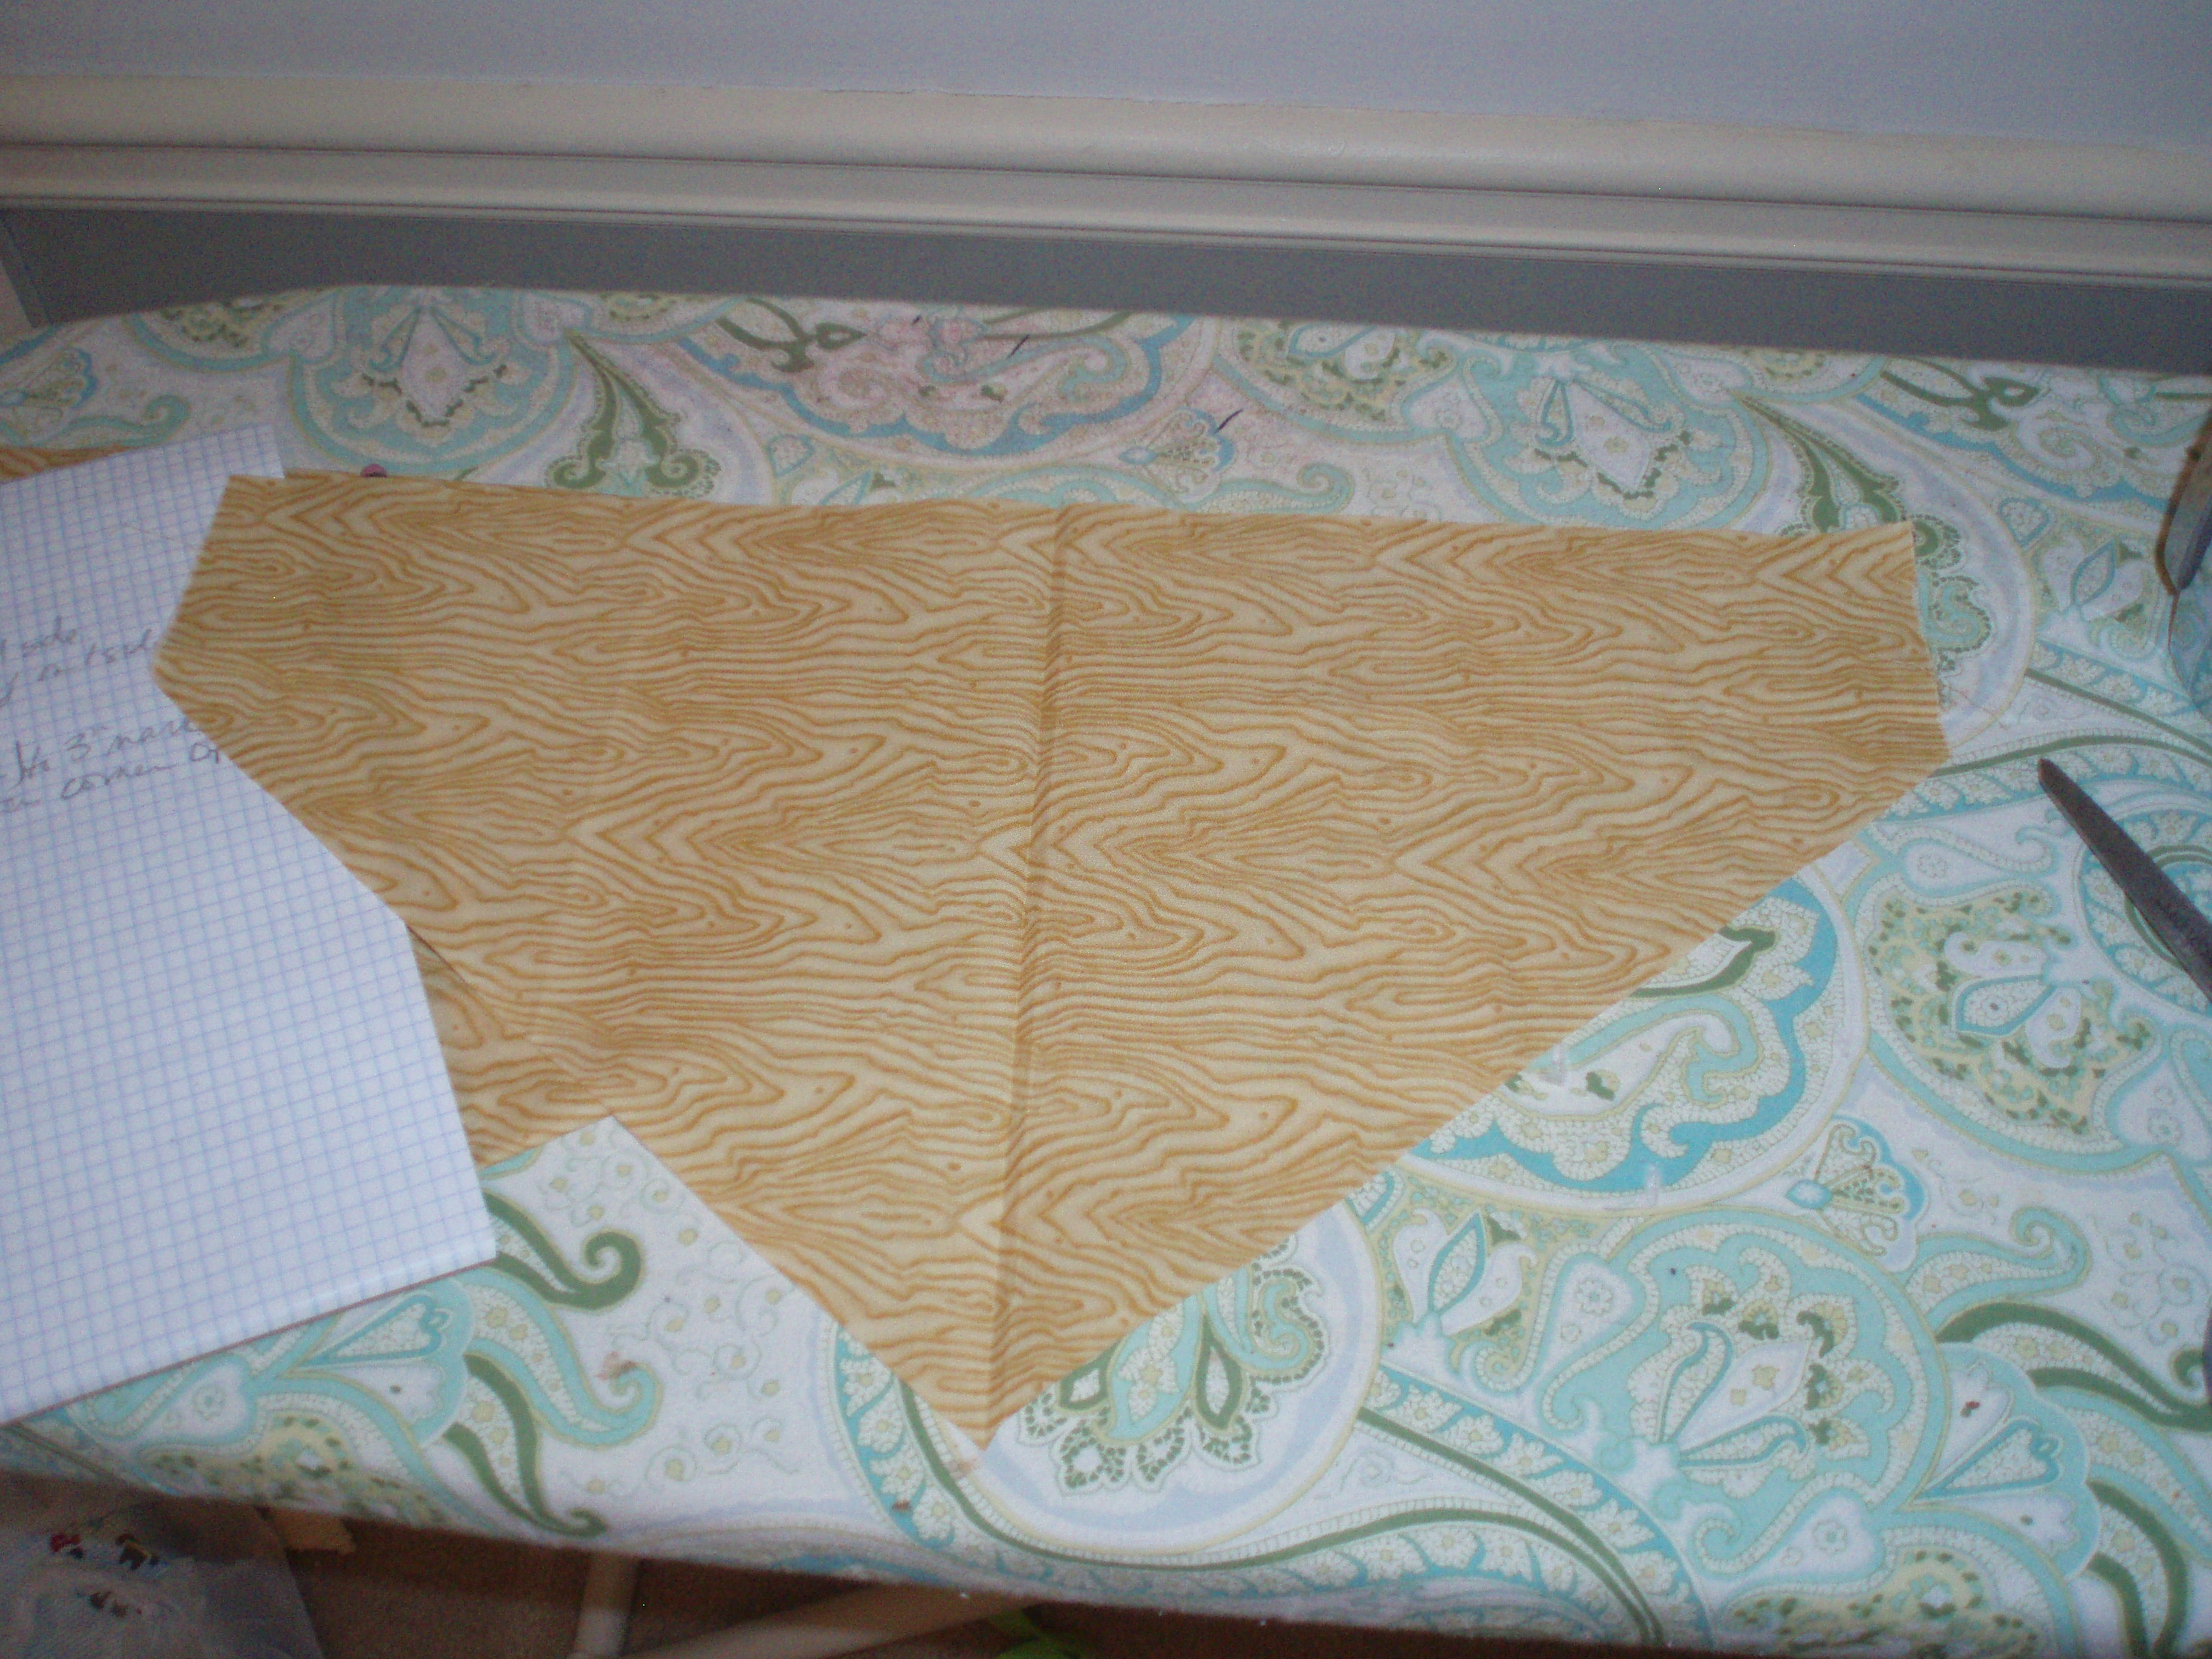 Cowboy bib shape of fabric is attained (looks kind of like a home plate in baseball).